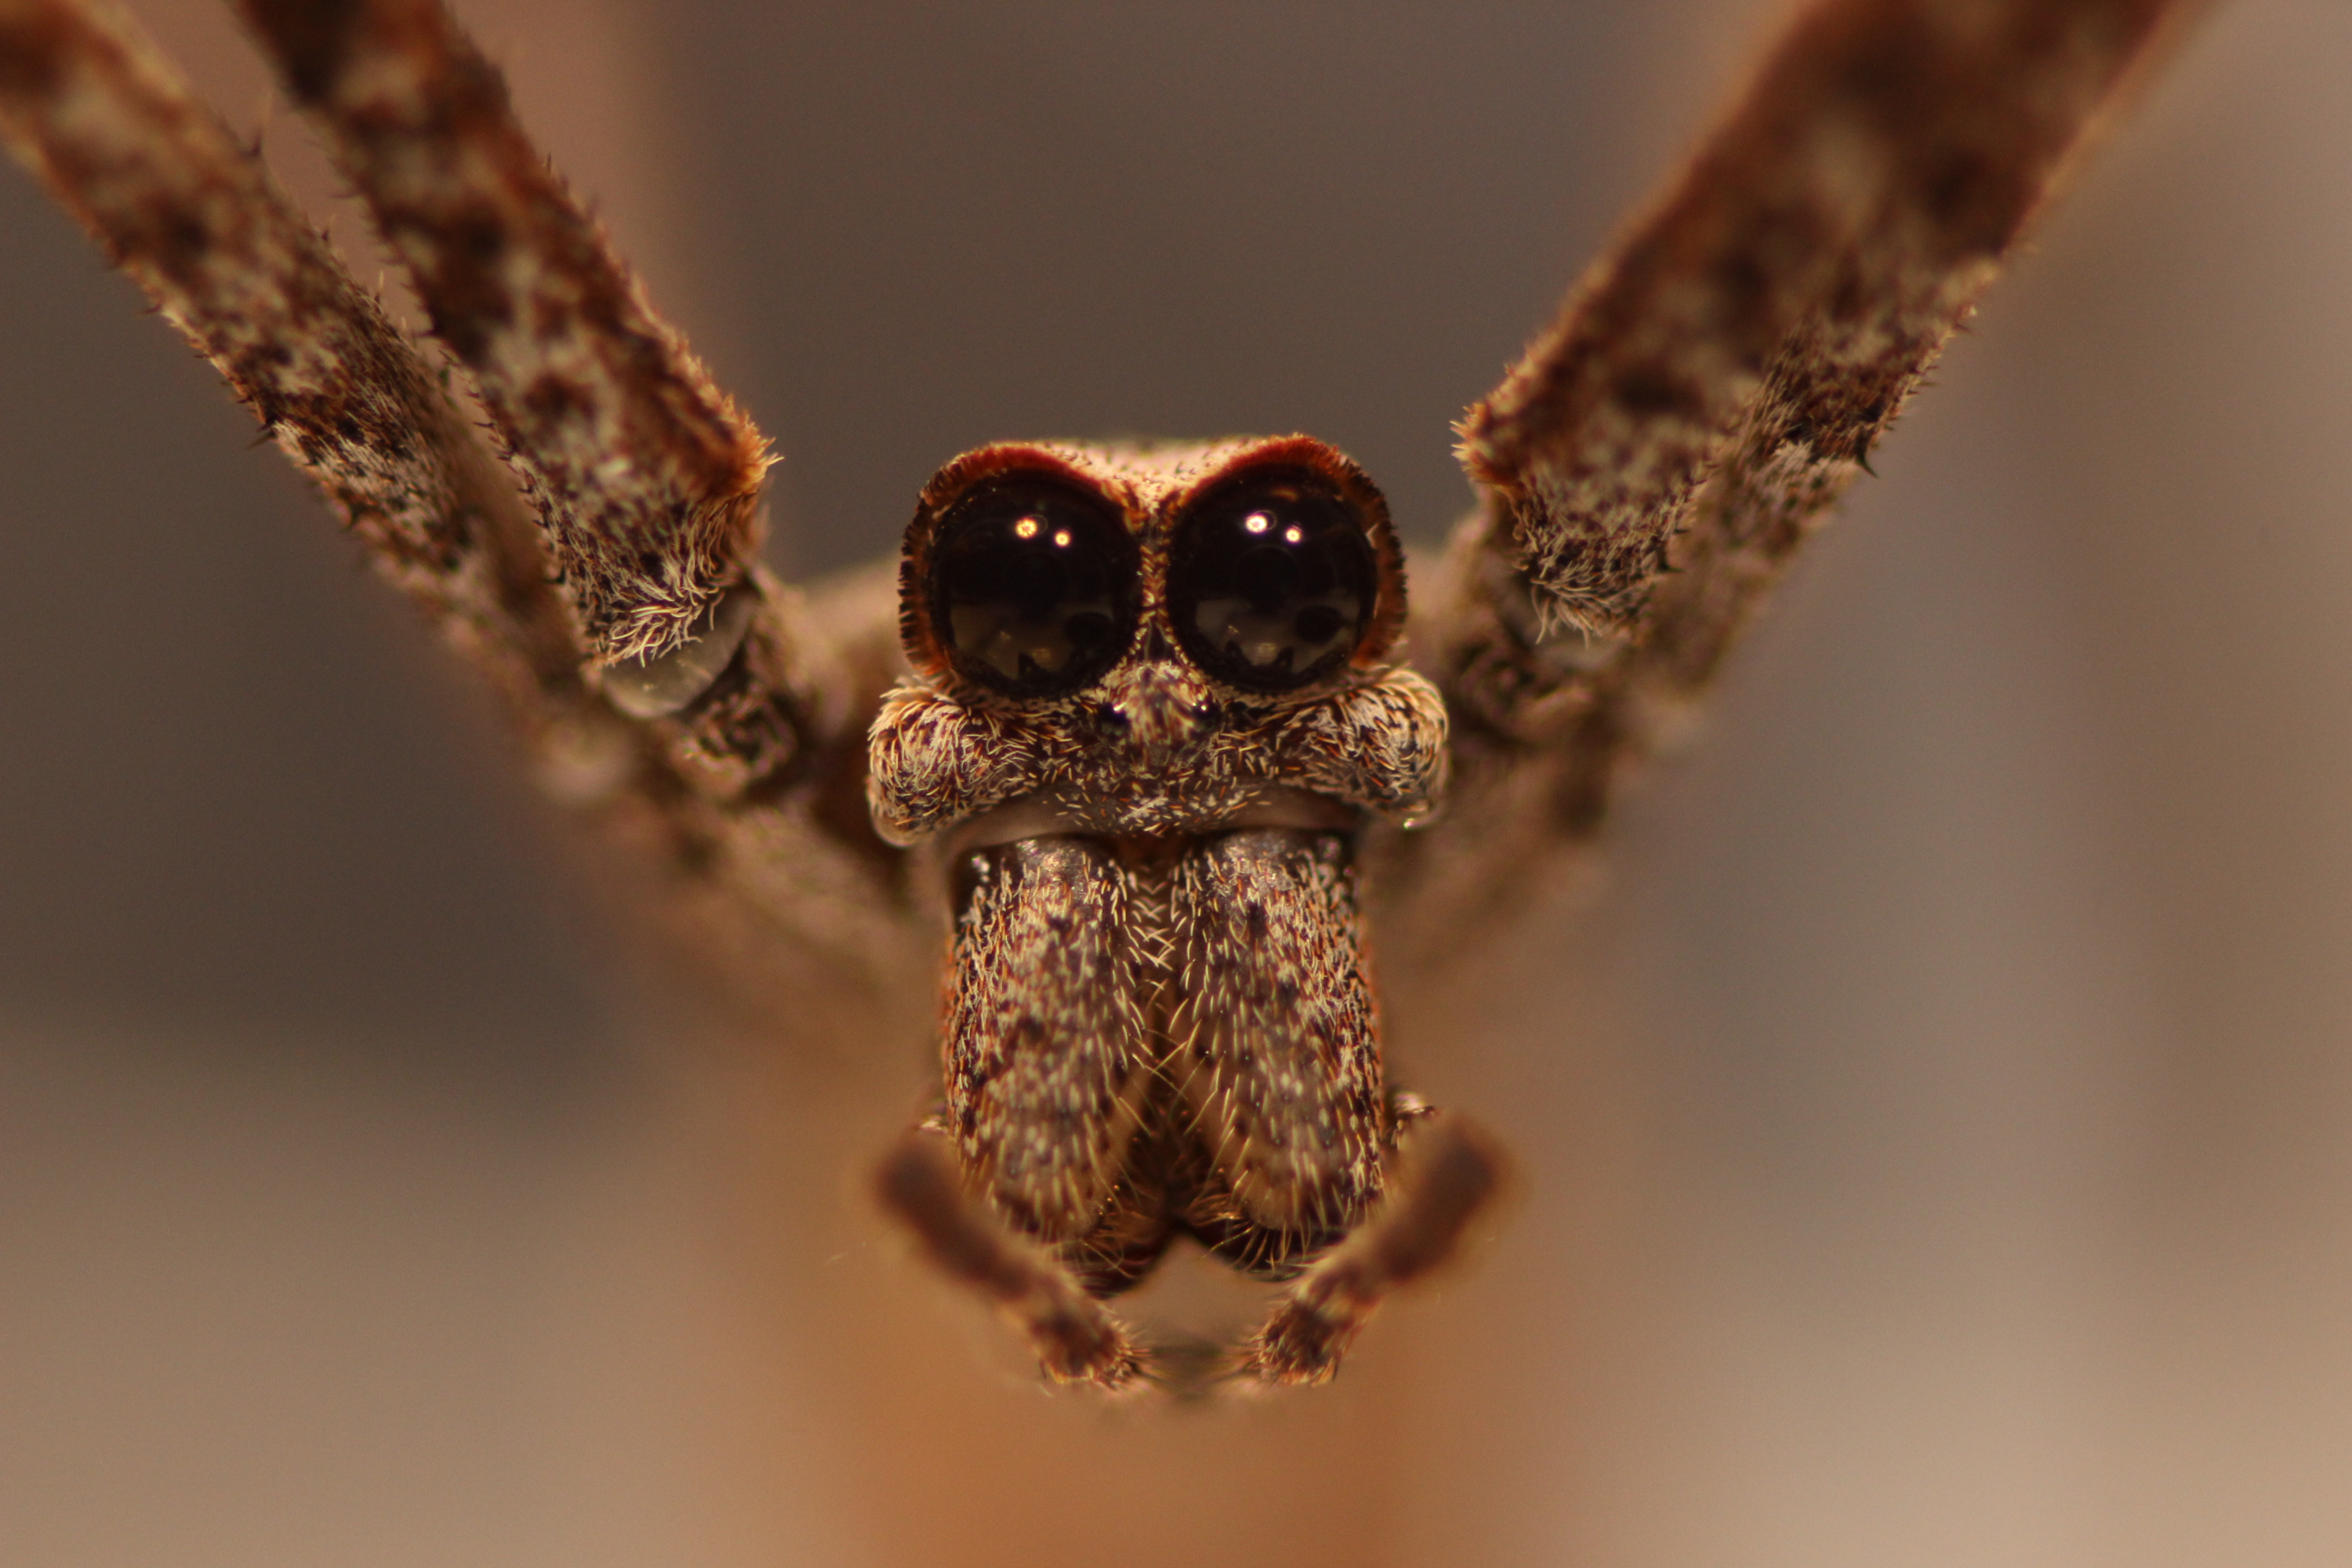 A new study from UNL biologists has revealed that the net-casting spider's secondary eyes -- the largest of any arachnid -- likely evolved in part to help it capture ground-based prey.